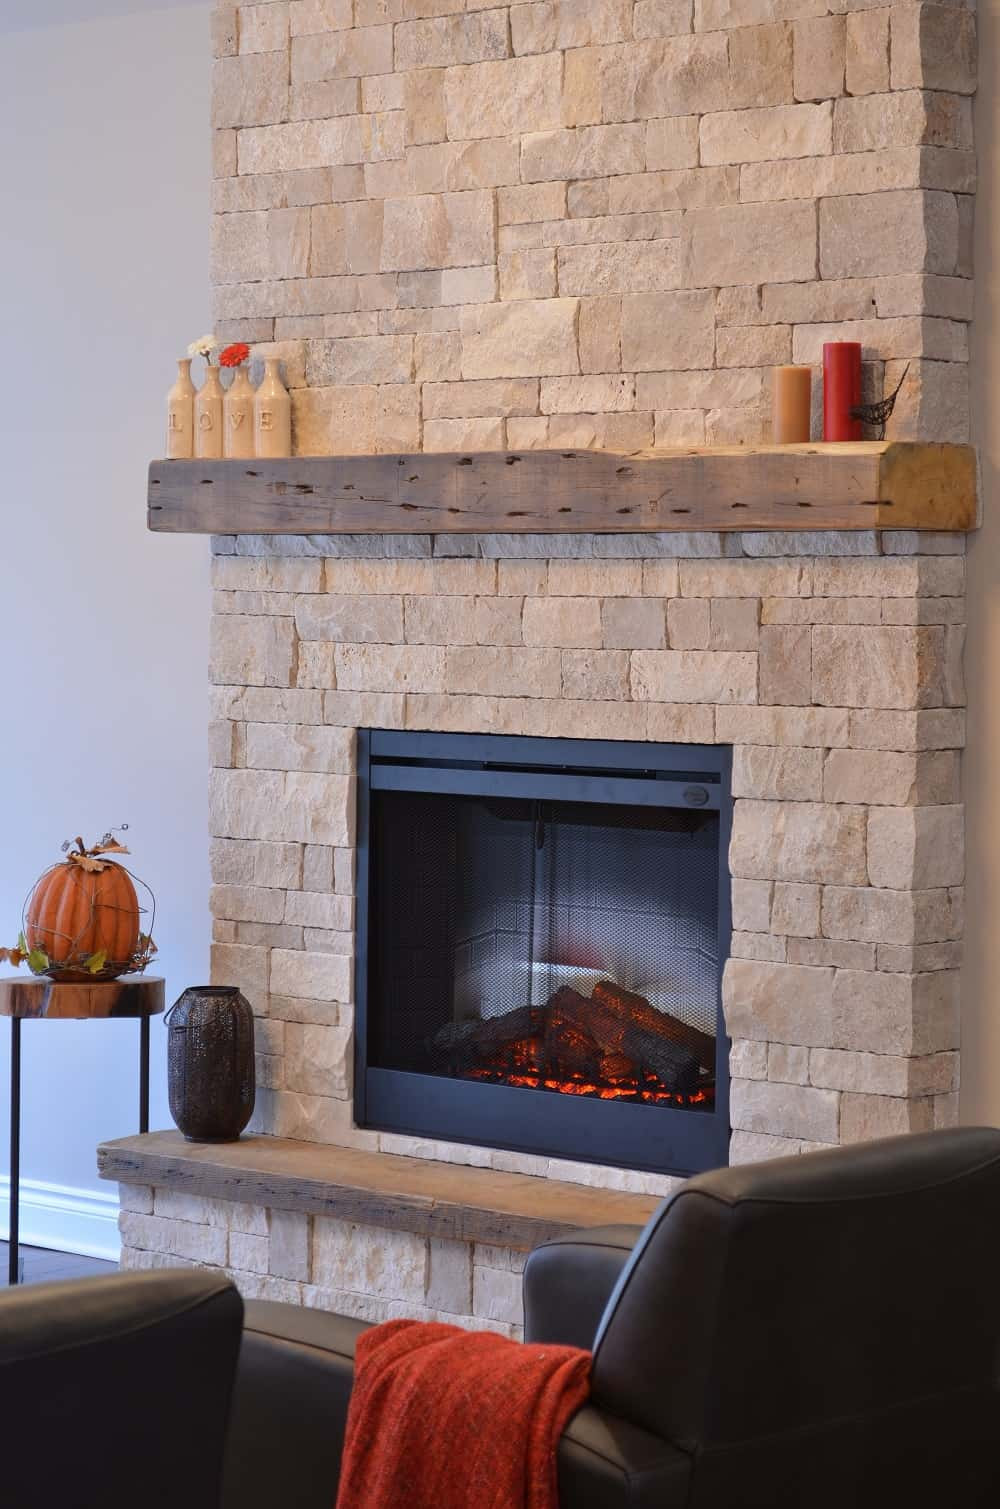 Convert Gas Fireplace To Electric
 How to convert a gas fireplace to electric Stylish